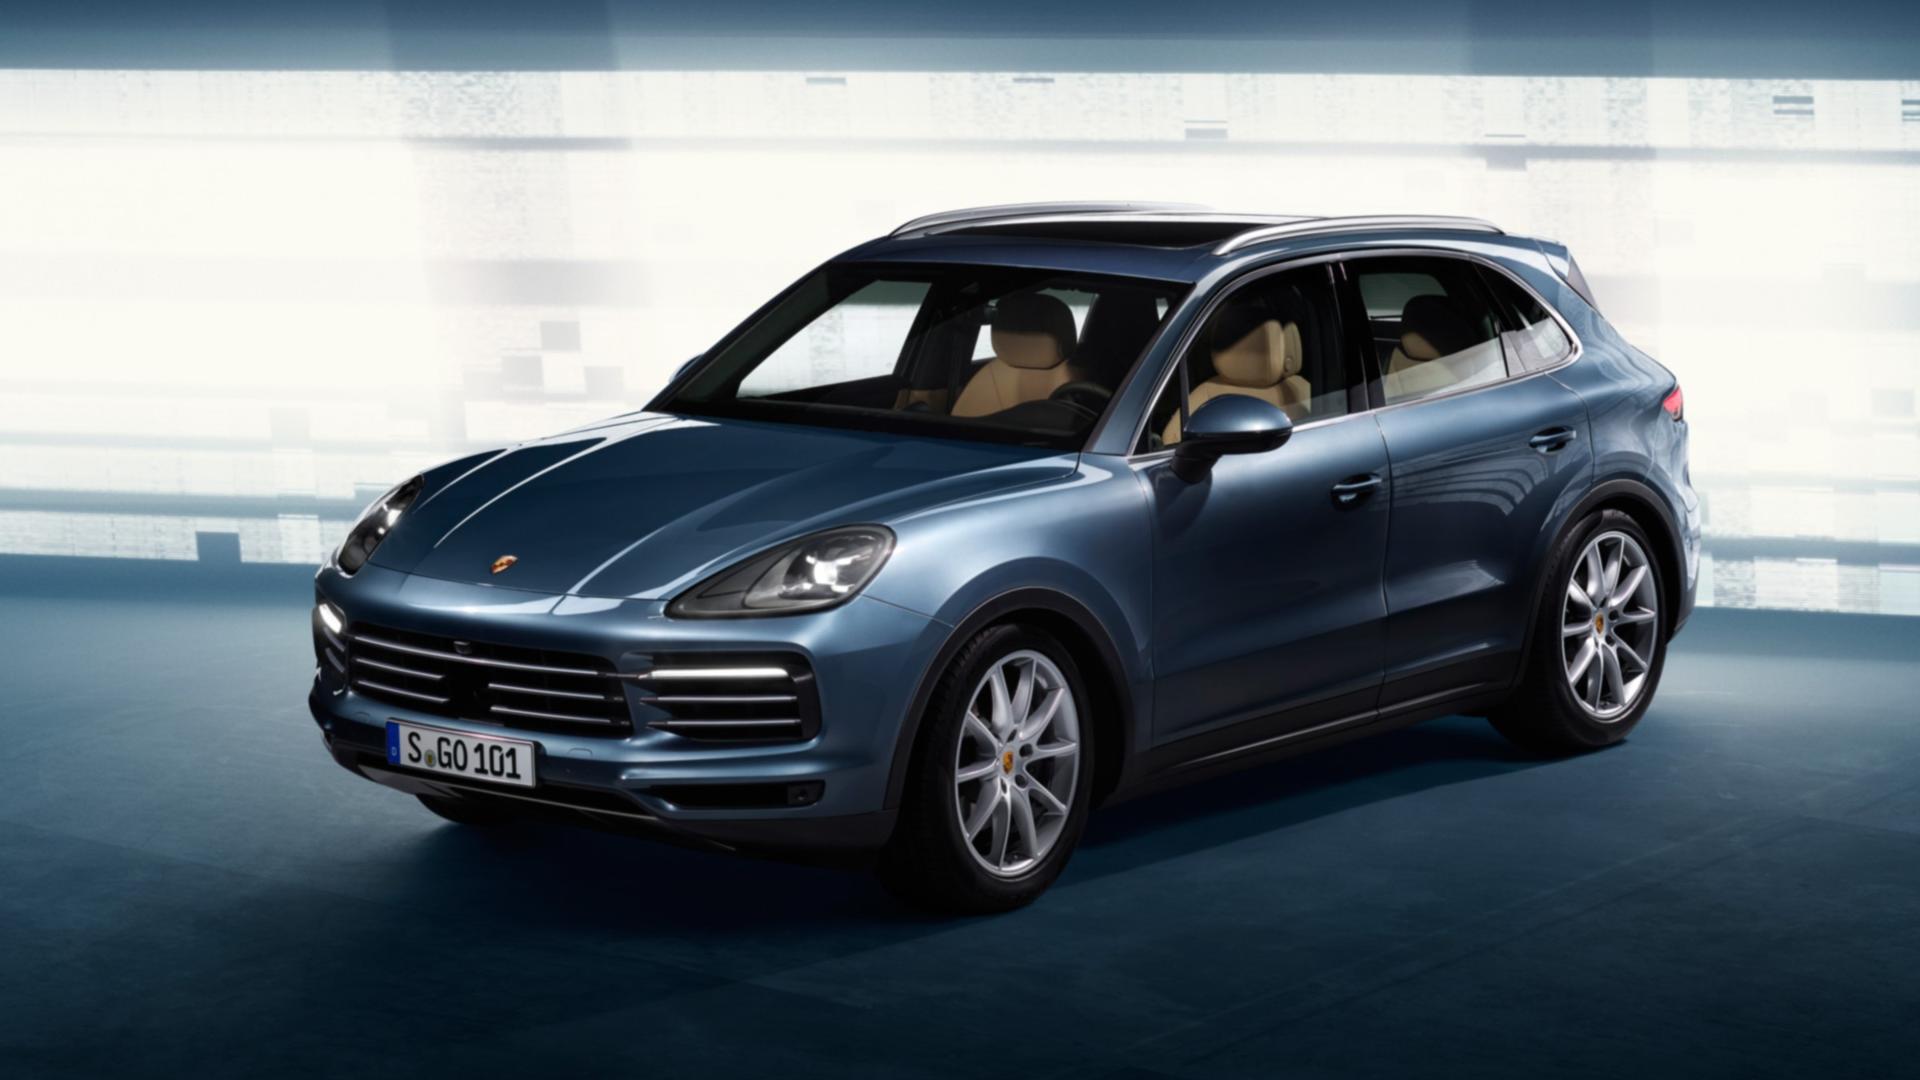 2018-porsche-cayenne-leaked-official-image_1.jpg